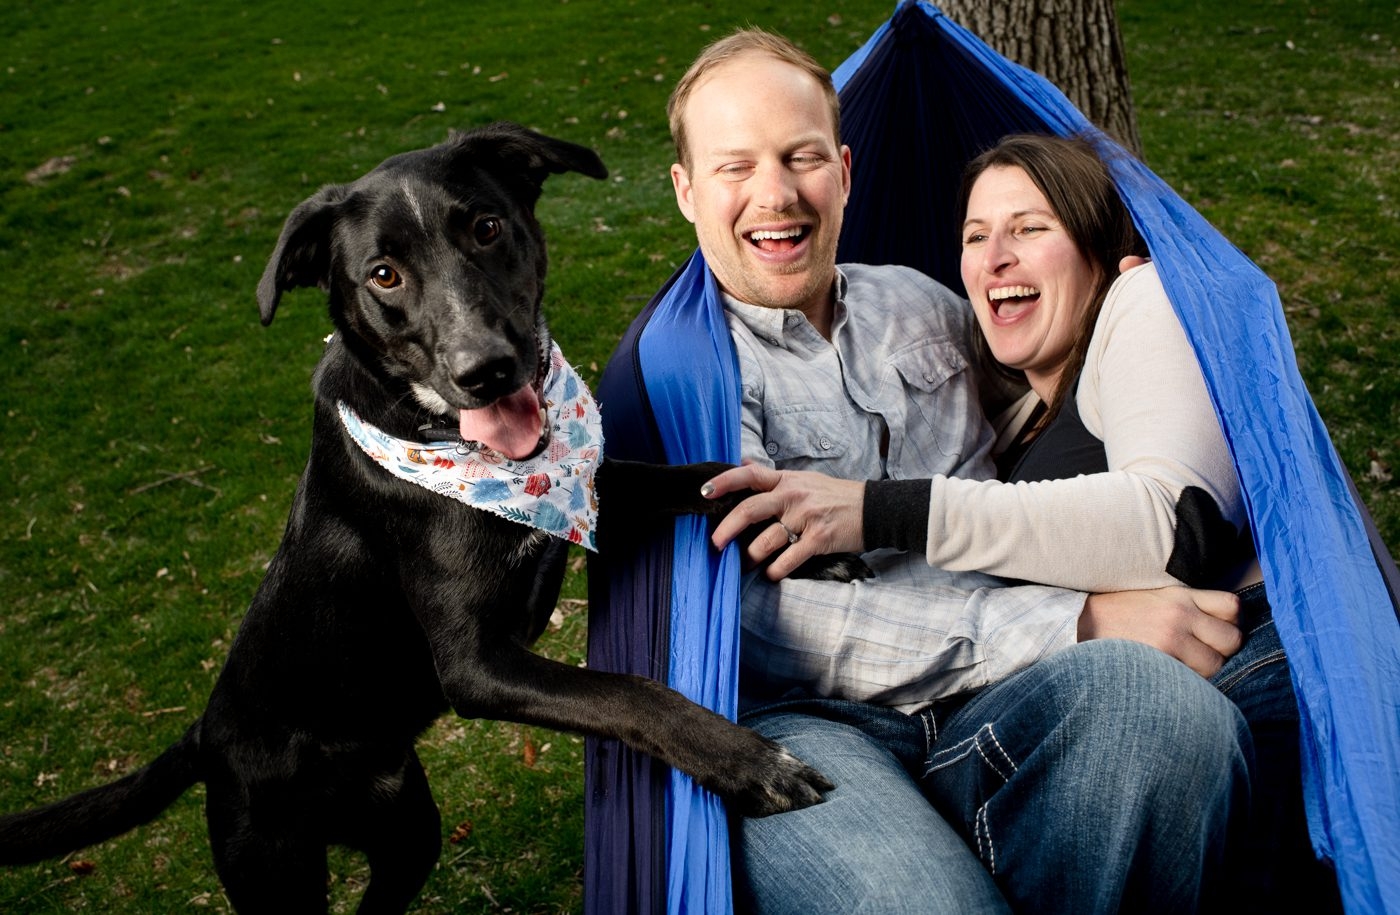 Engaged-Couple-in-Hammock-surprised-by-Dog-Jump-Best-of-2021-Portraits